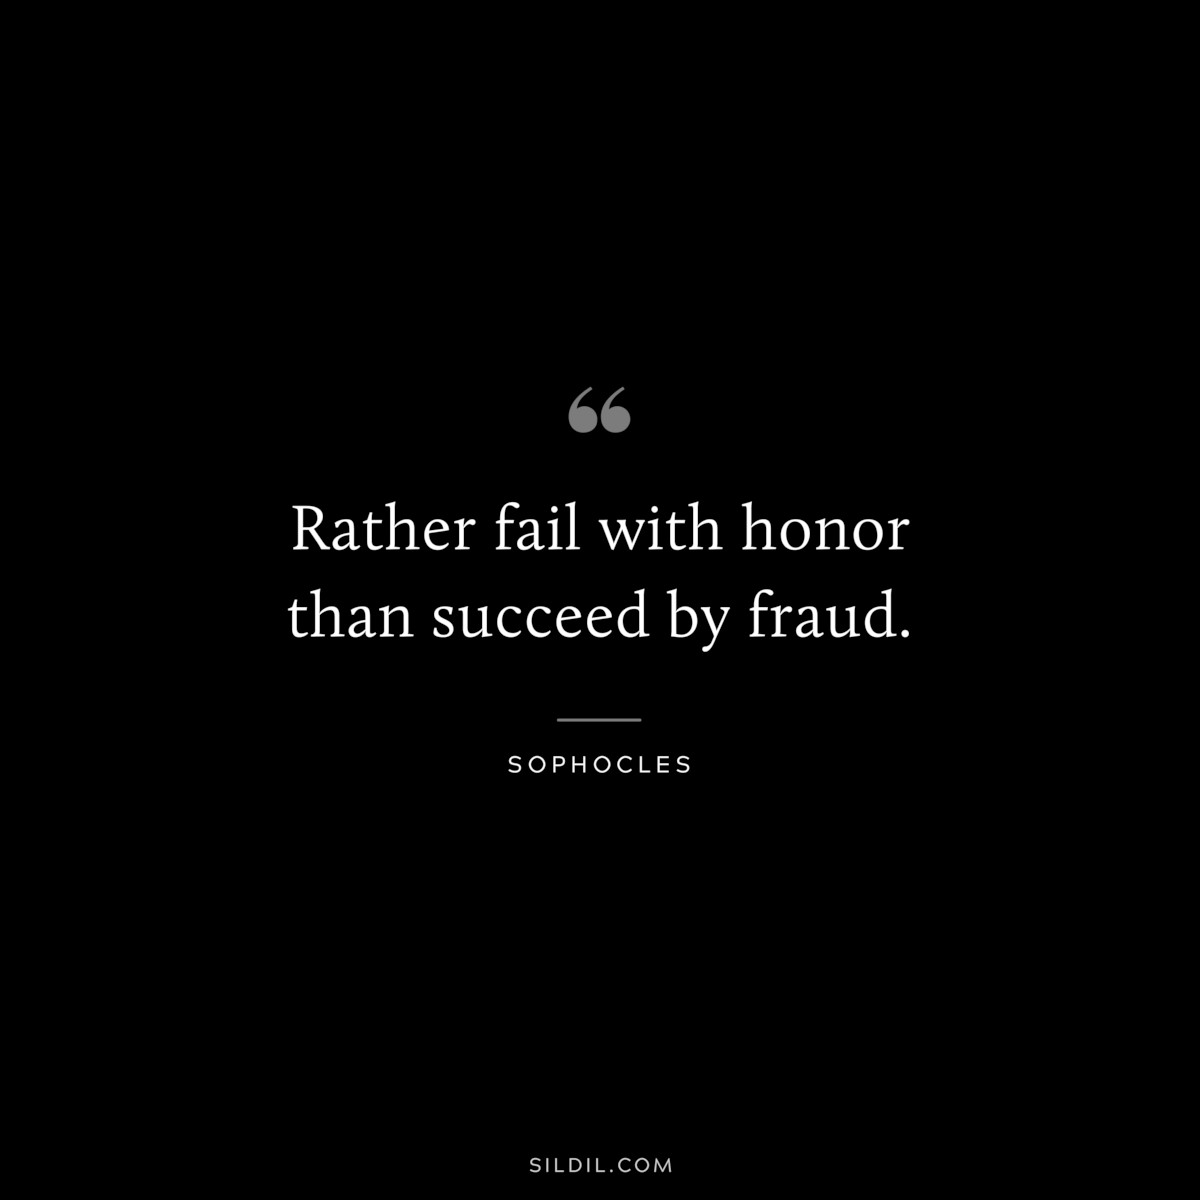 Rather fail with honor than succeed by fraud. ― Sophocles